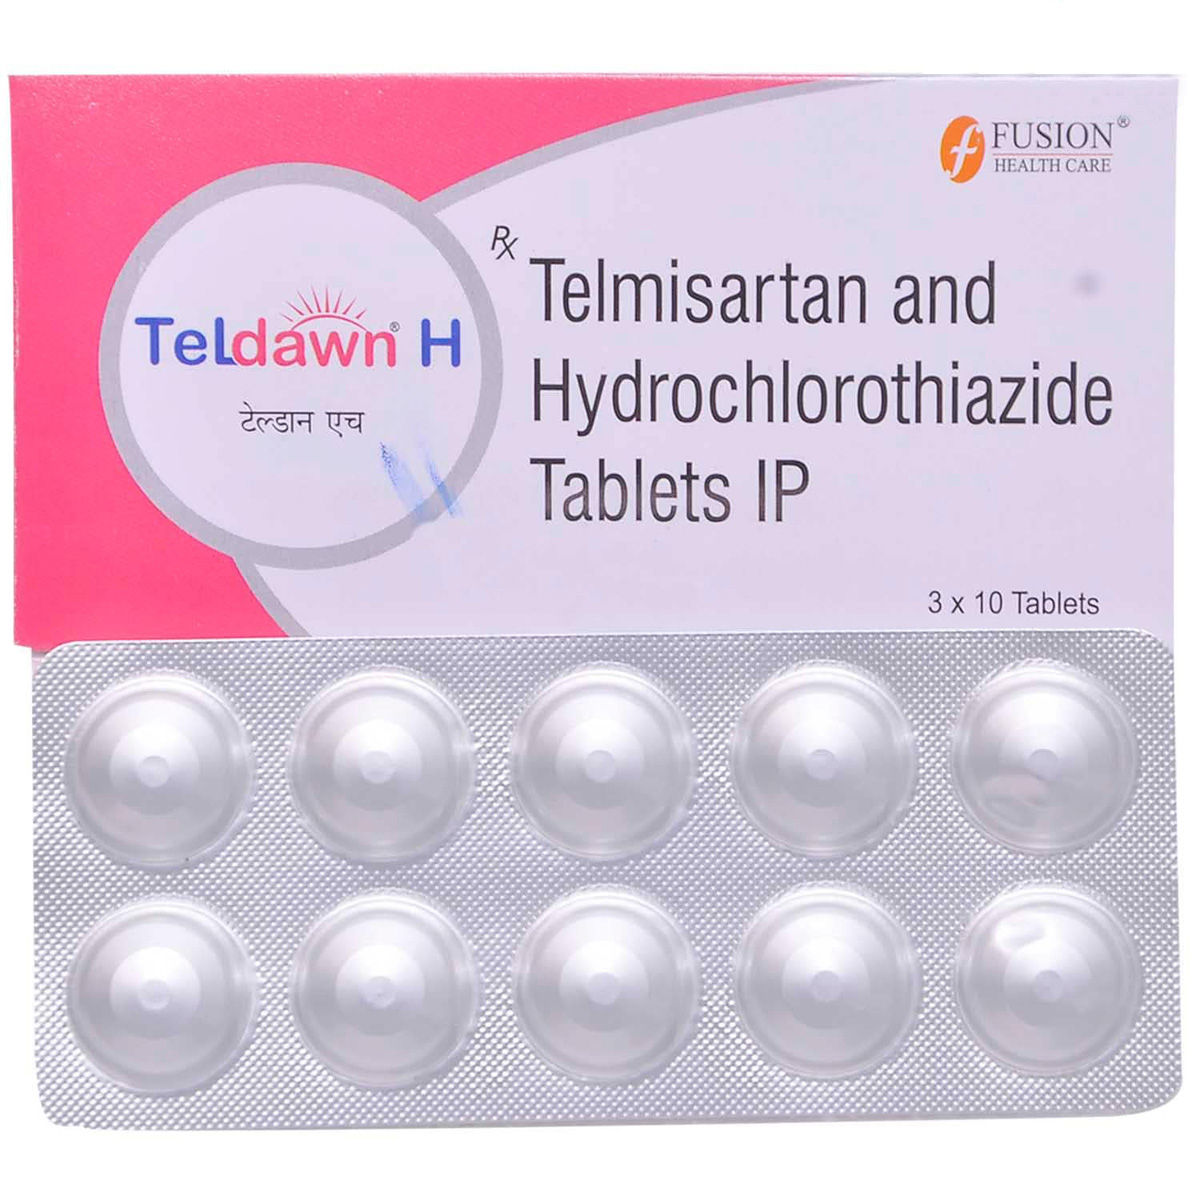 Telvas H 40/12.5 Tablet: View Uses, Side Effects, Price and Substitutes